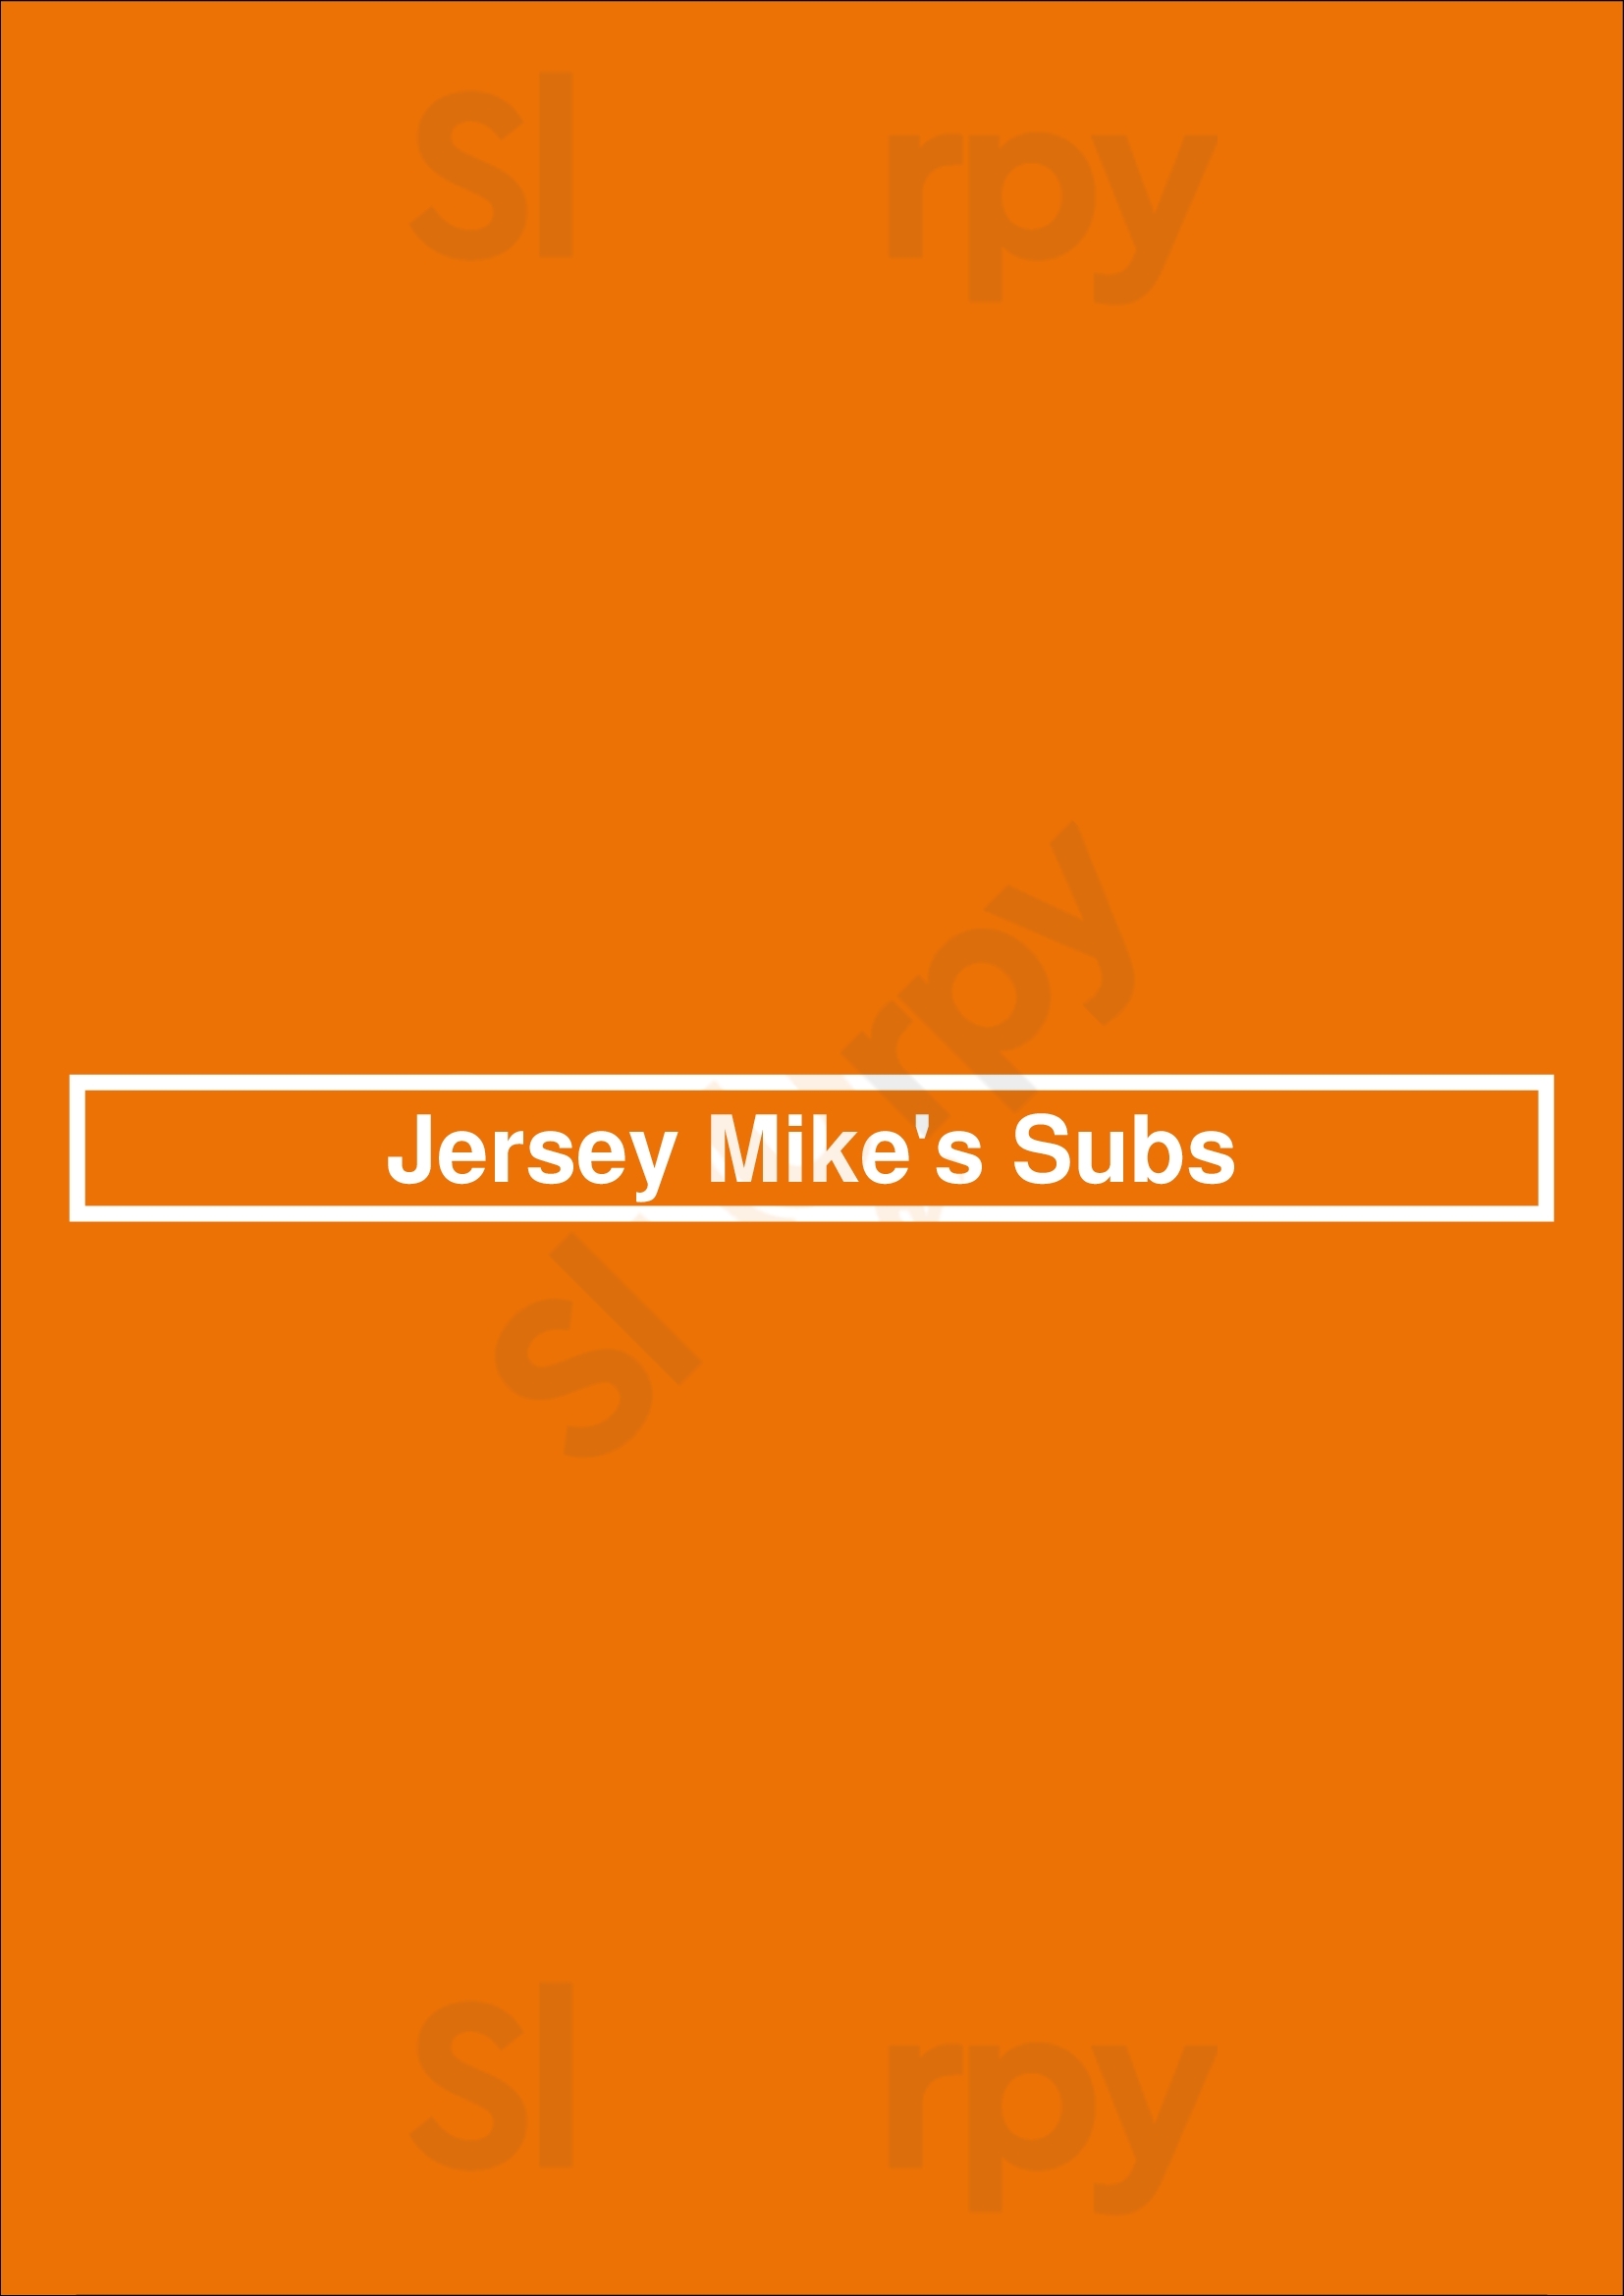 Jersey Mike's Subs Melbourne Menu - 1